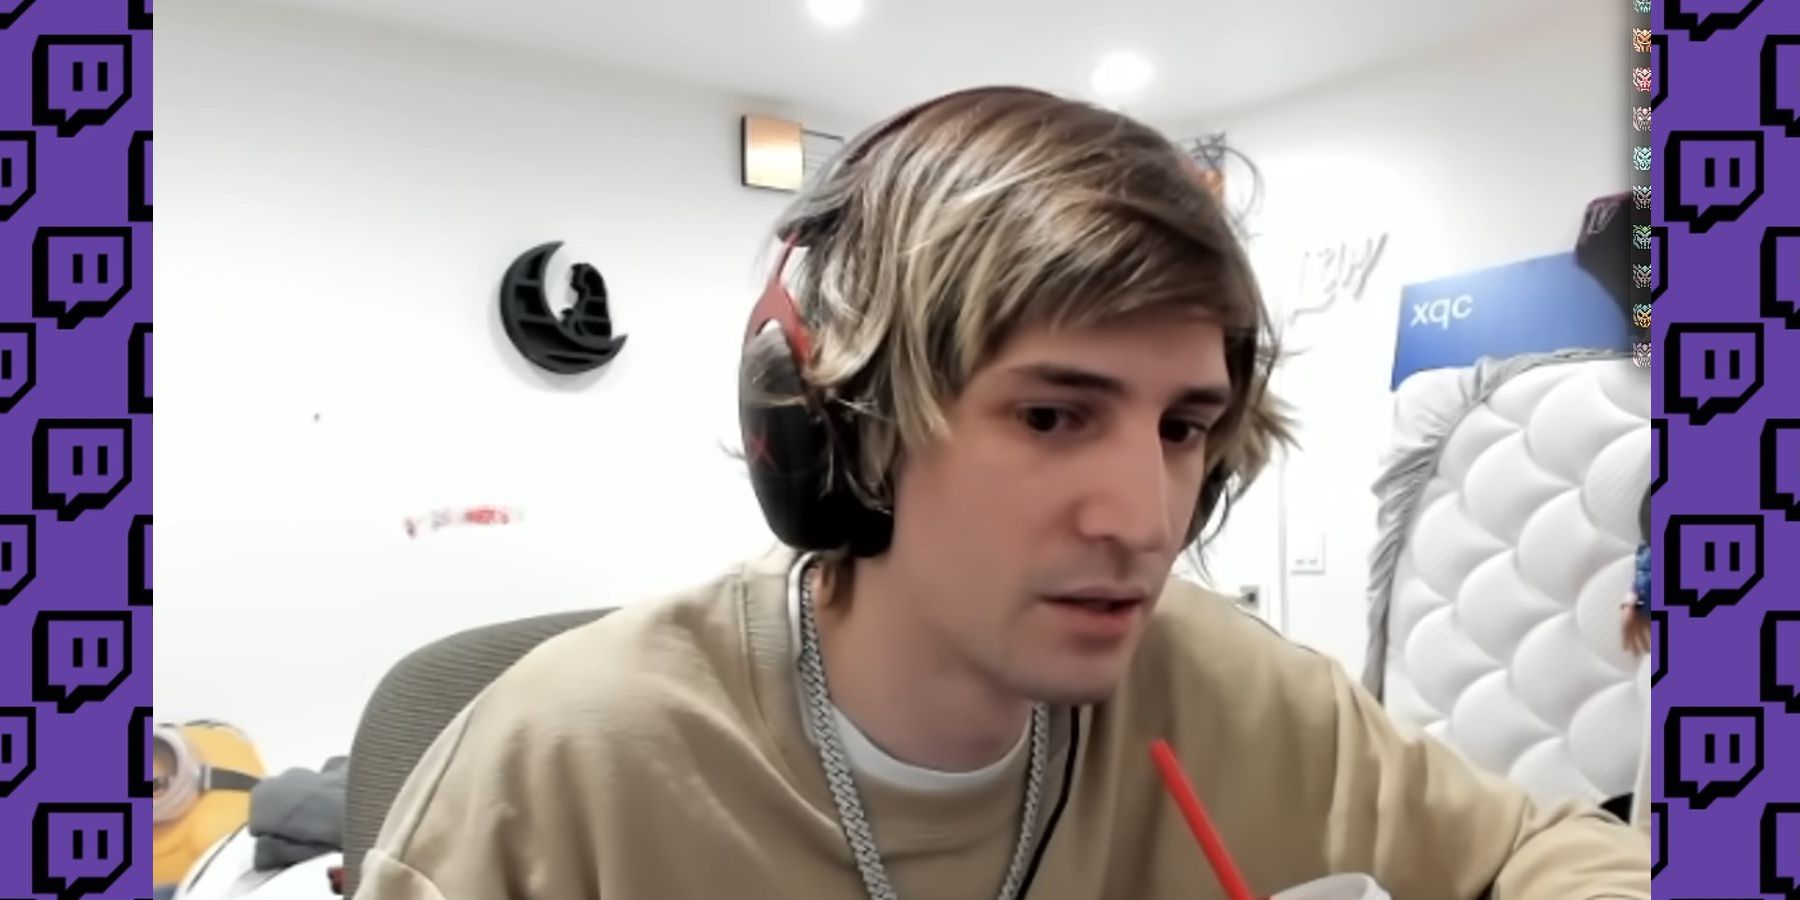 Twitch: Why xQC Remains a Controversial Figure